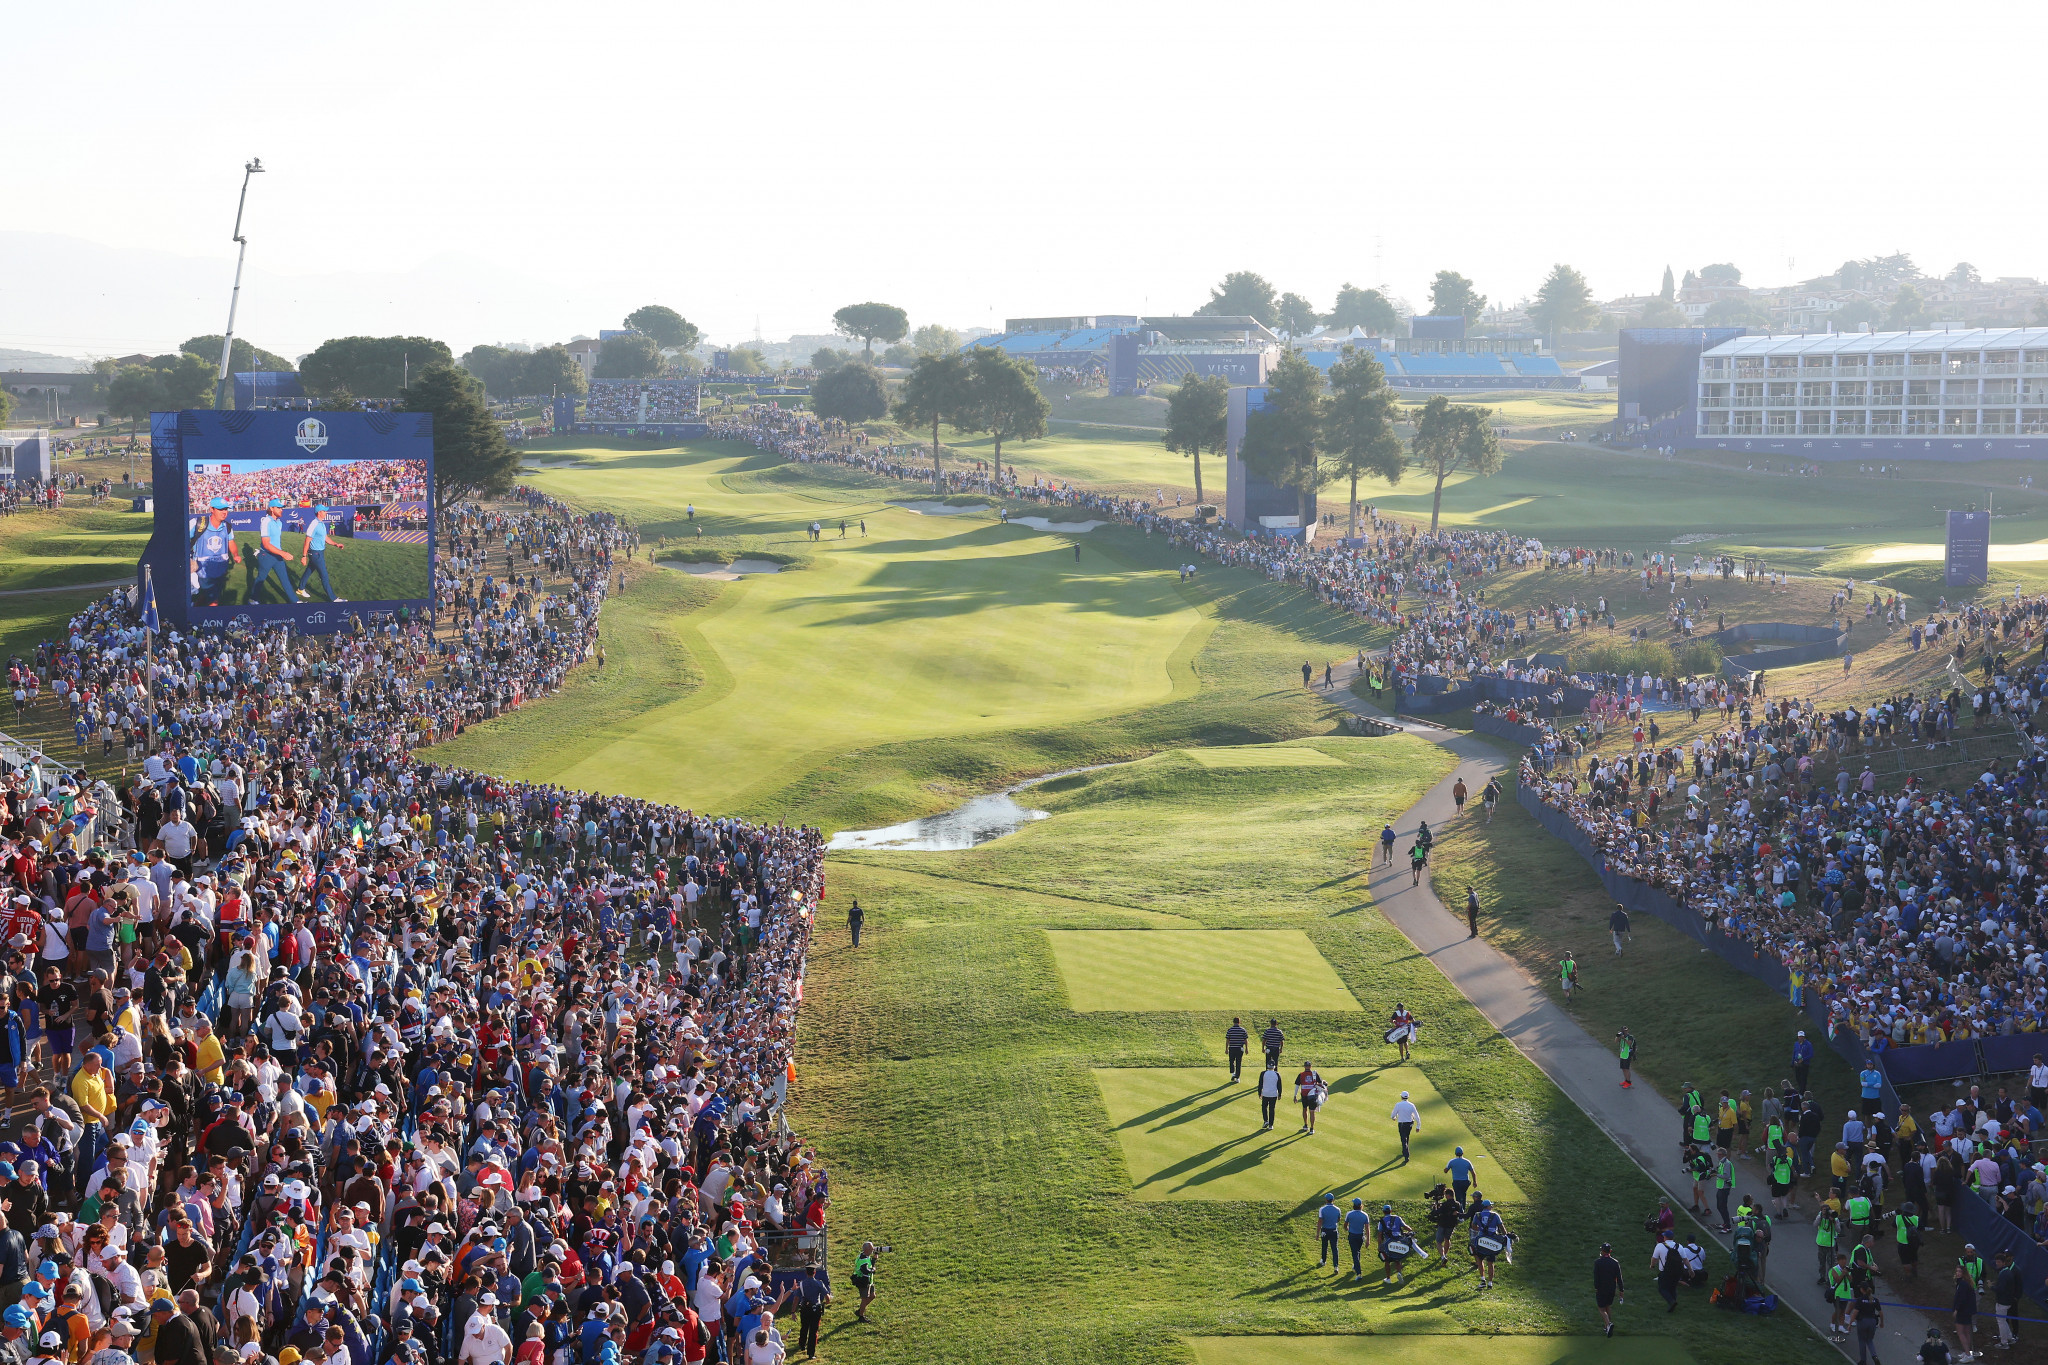 Europe won the opening session 4-0 for the first time at a Ryder Cup ©Getty Images